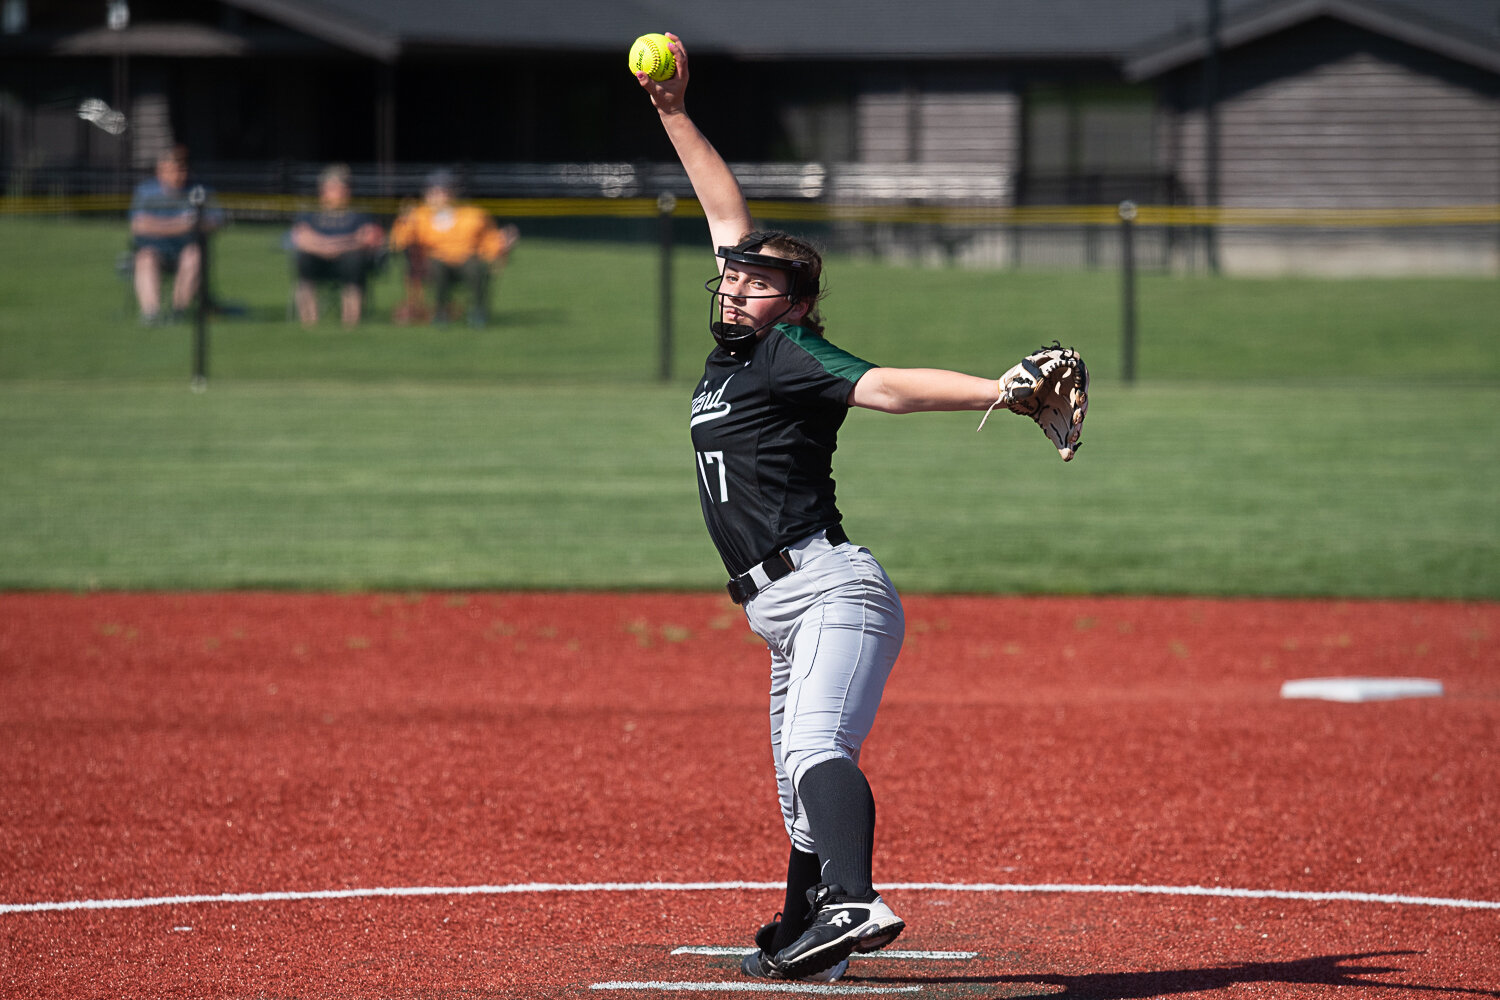 Addi Christensen throws a pitch during Woodland's 4-3 loss to Tumwater in the quarterfinals of the 2A District 4 tournament on May 18 at Rec Park in Chehalis.